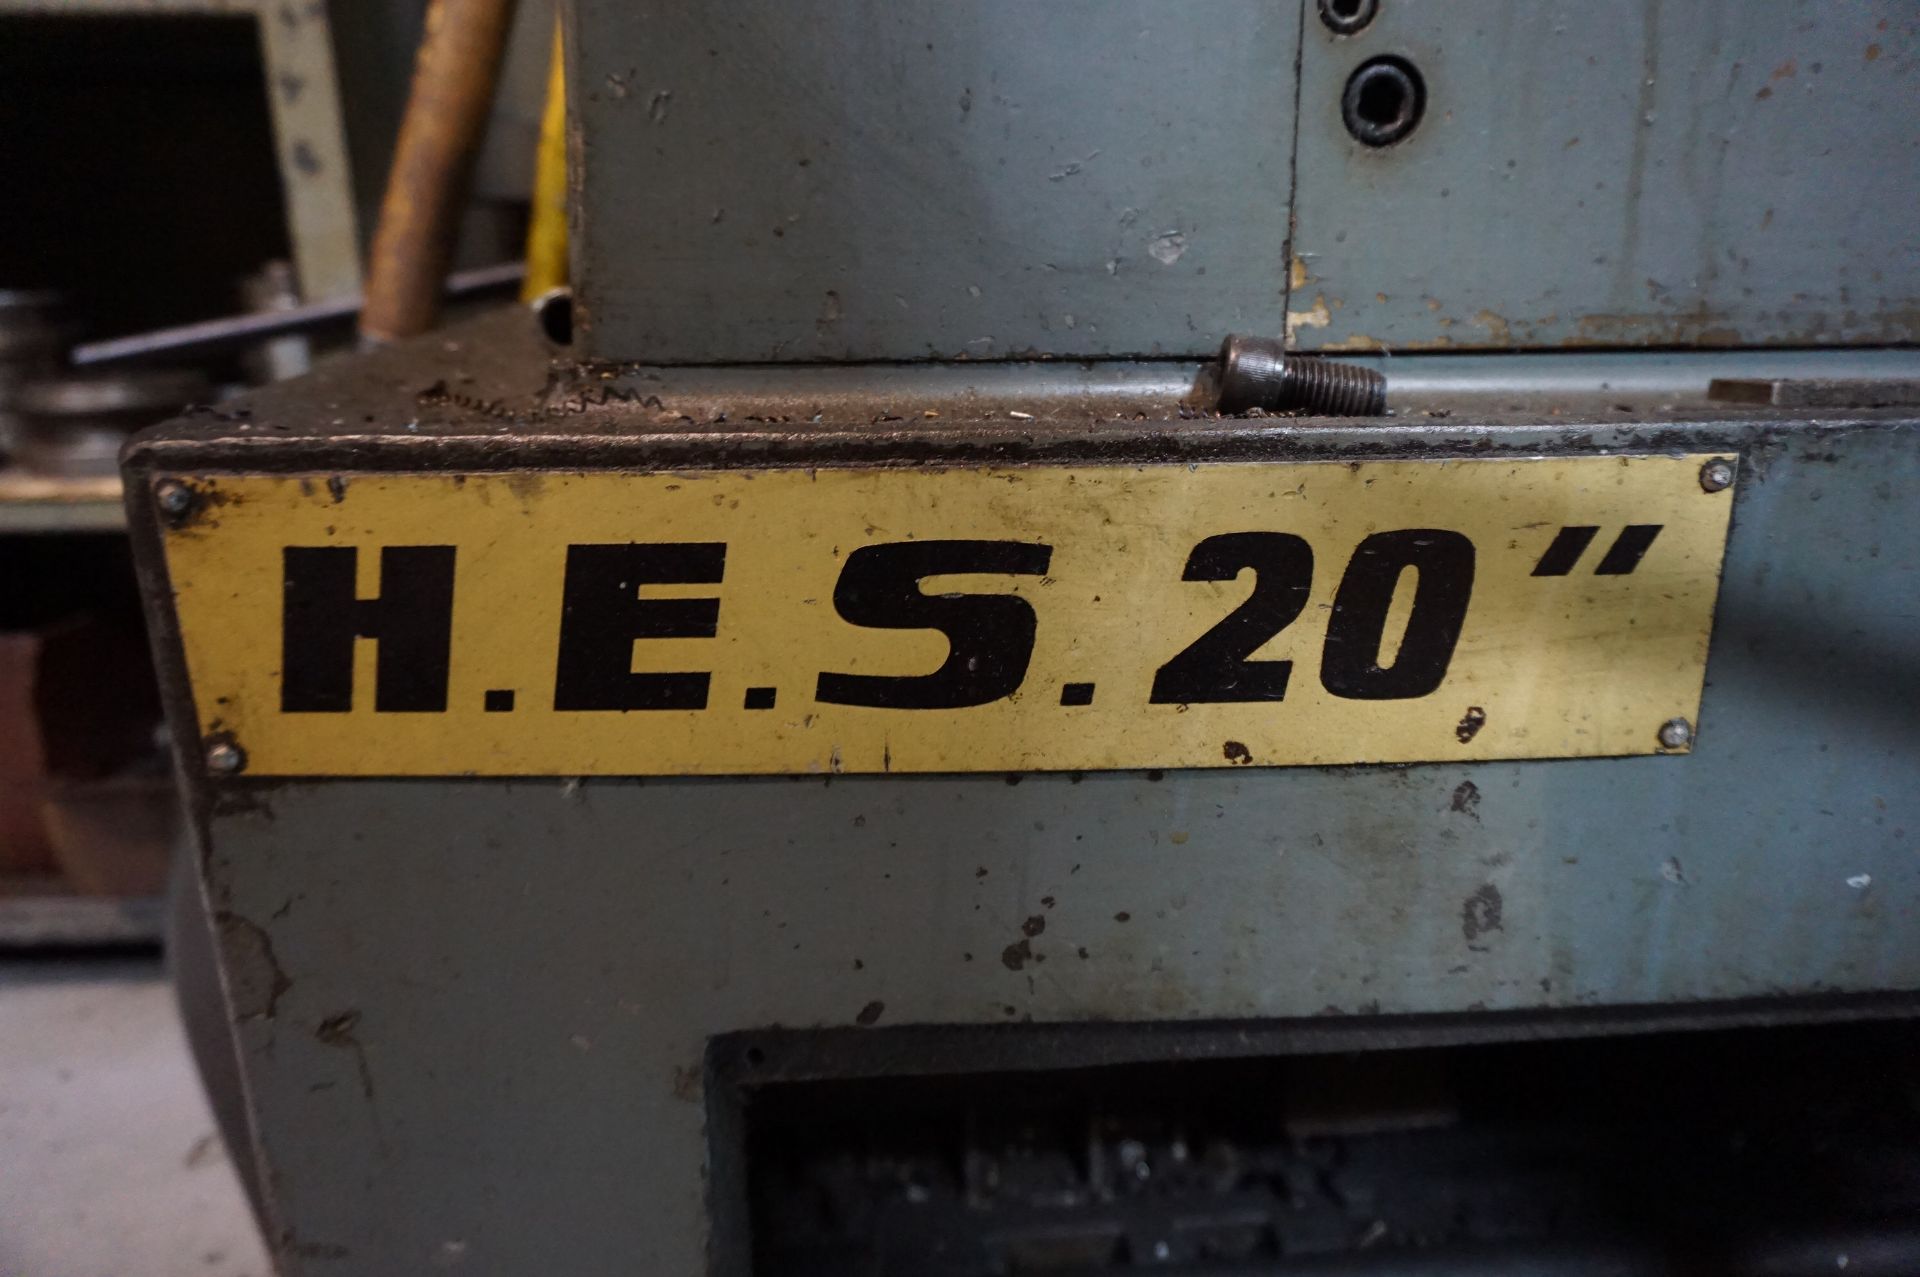 1970 H.E.S. MACHINE LATHE 20" X 80", MODEL 550, S/N 11540 WITH 10" CHUCK, KEYED CHUCK ON TAILSTOCK - Image 6 of 10